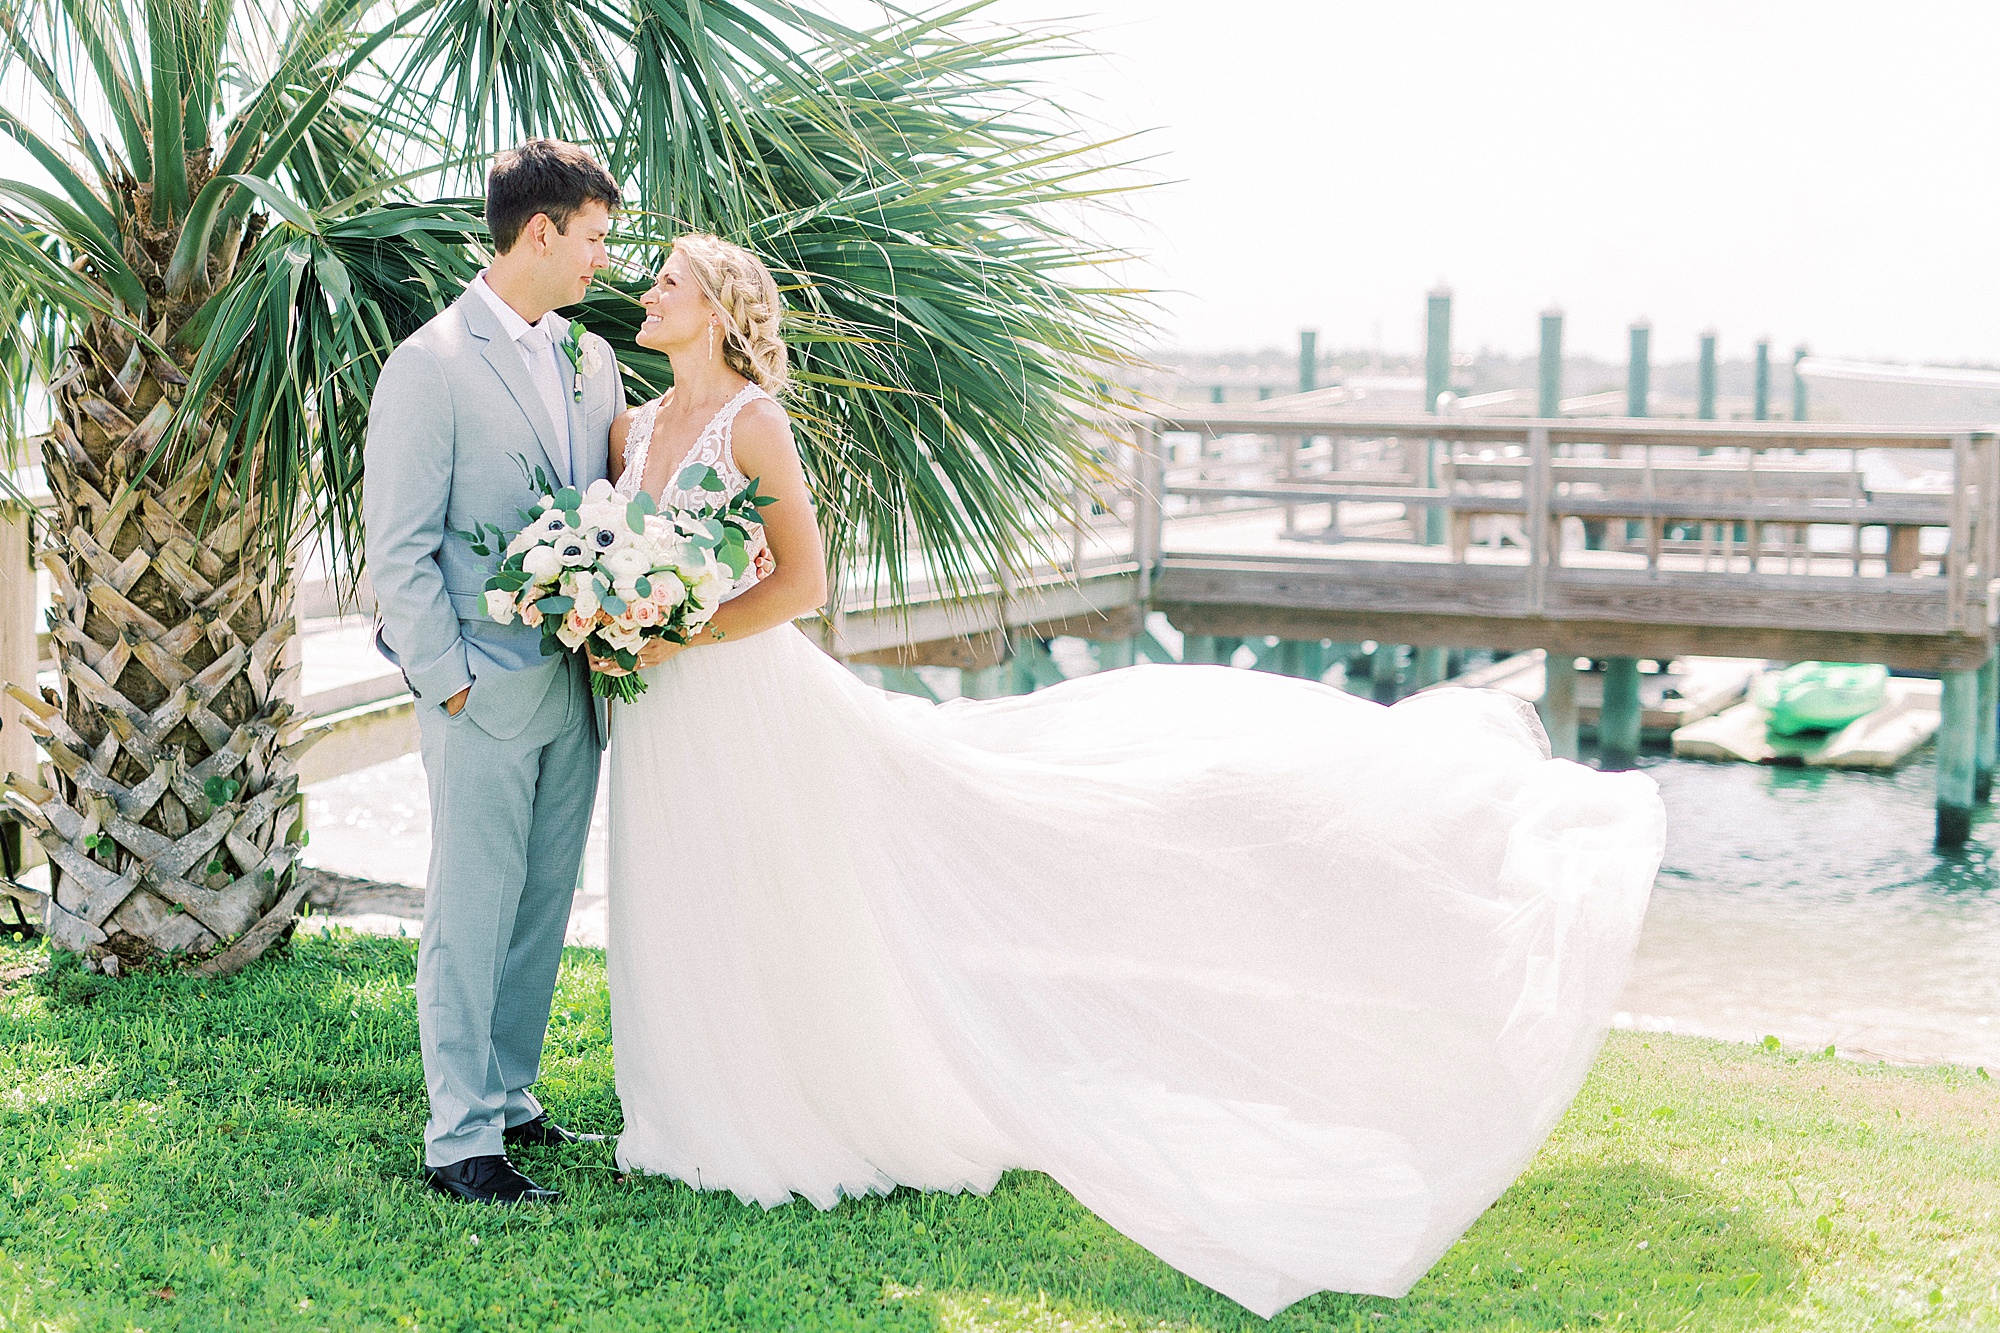 newlyweds pose by palm tree with bride's dress bowing in wind